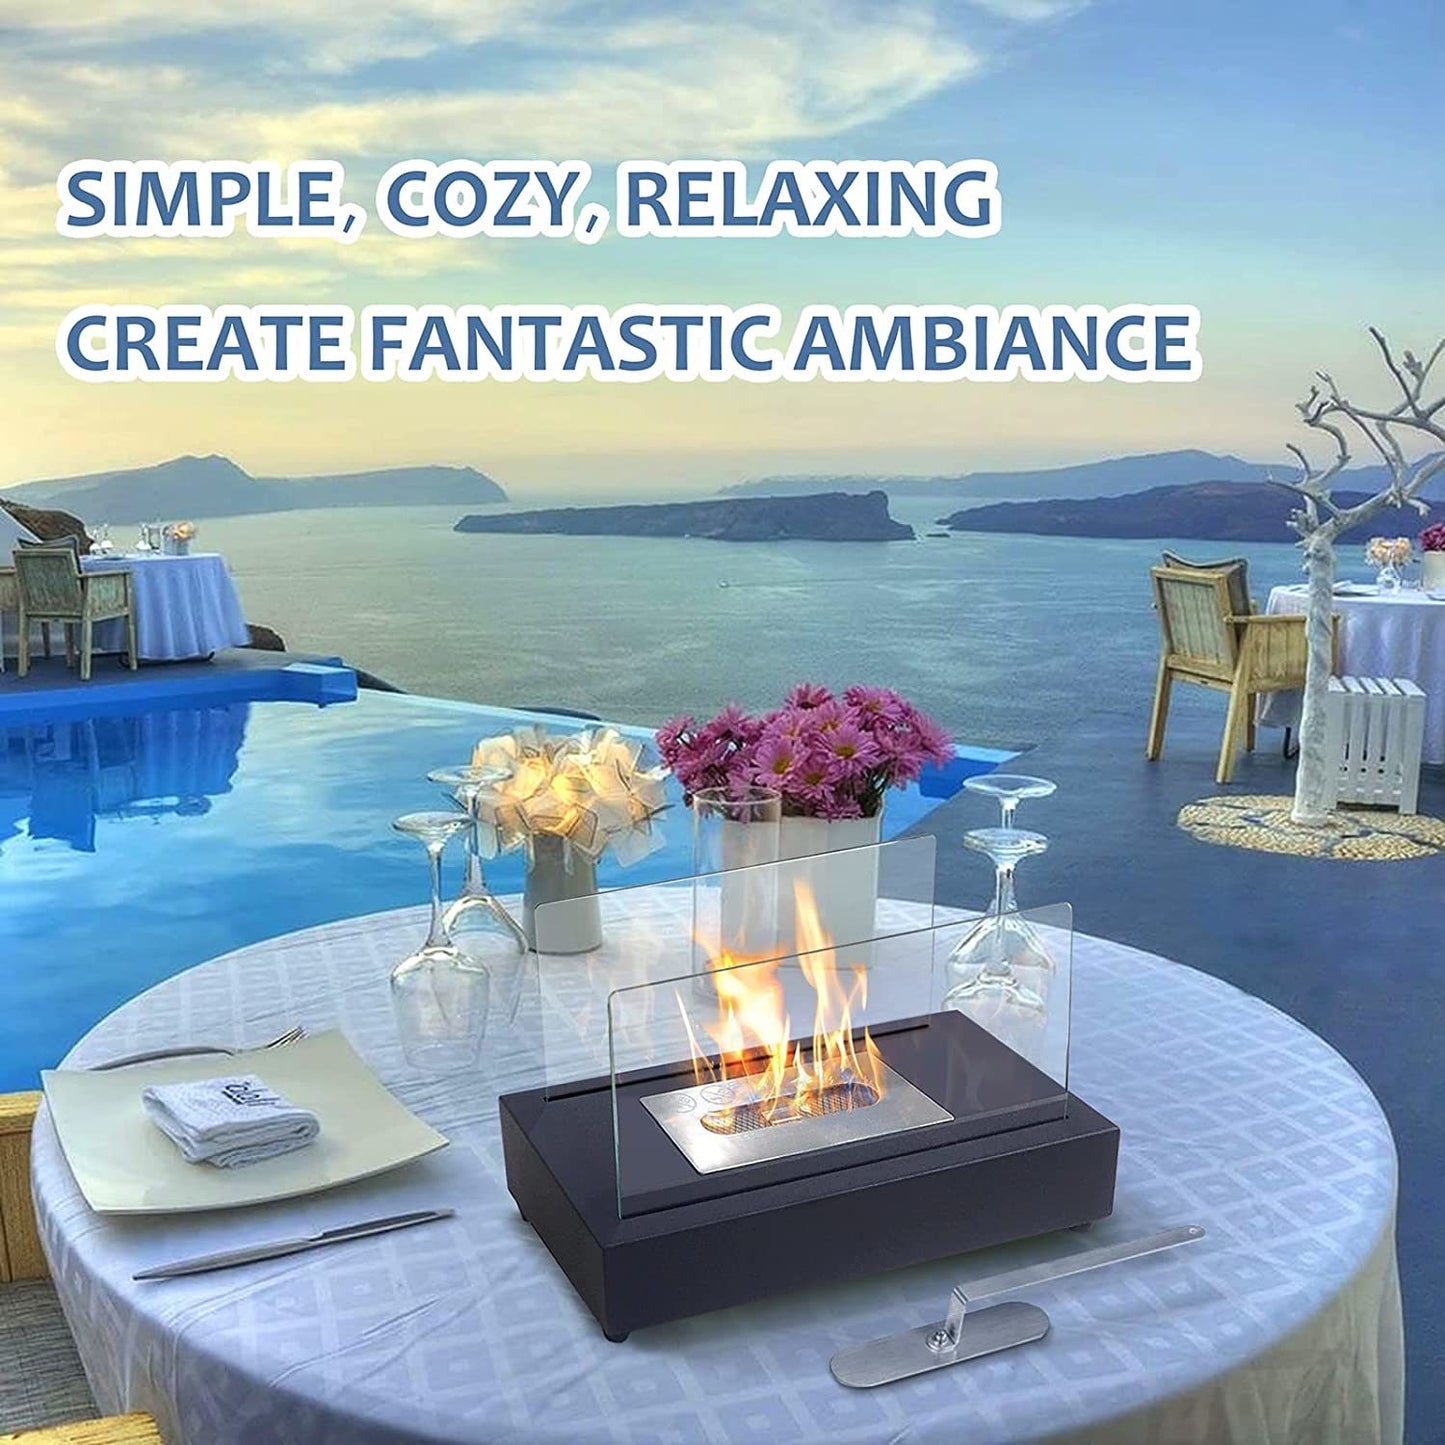 Upgrades Tabletop Rectangle Fire Pits; Portable Smokeless Bio Ethanol Fireplace with Realistic Burning; Awesome Gifts